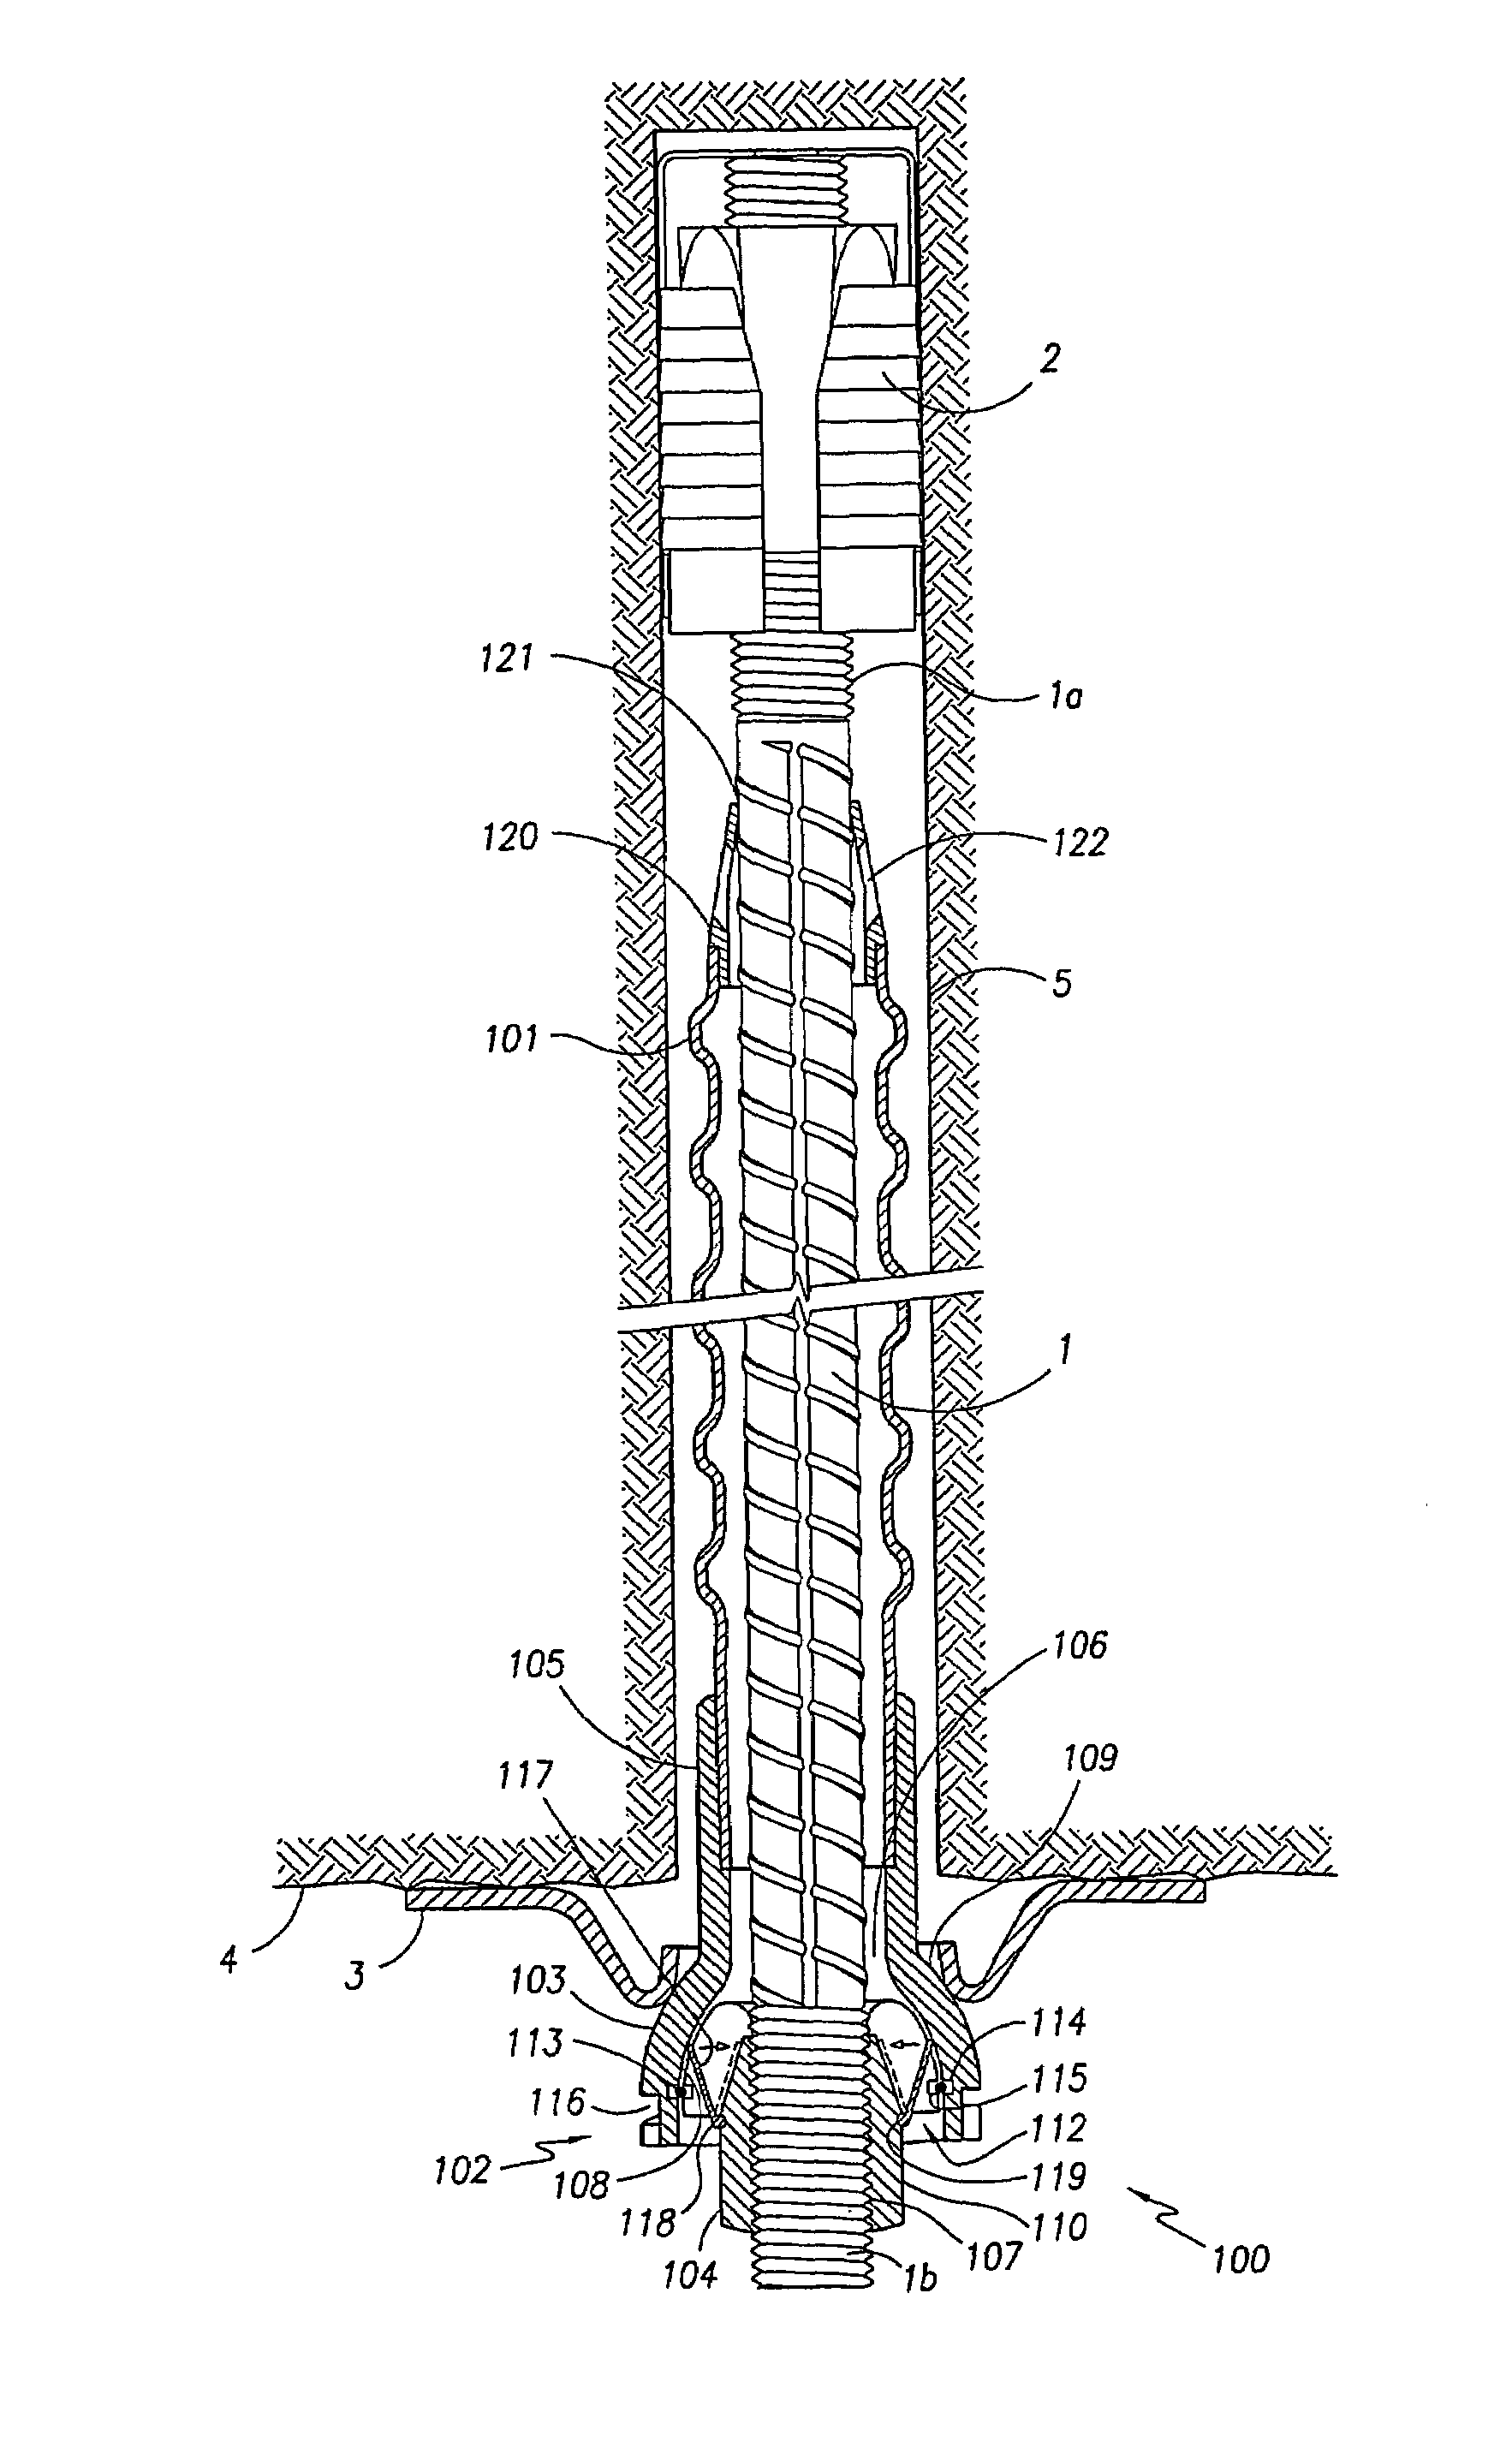 Rock bolt post grouting apparatus